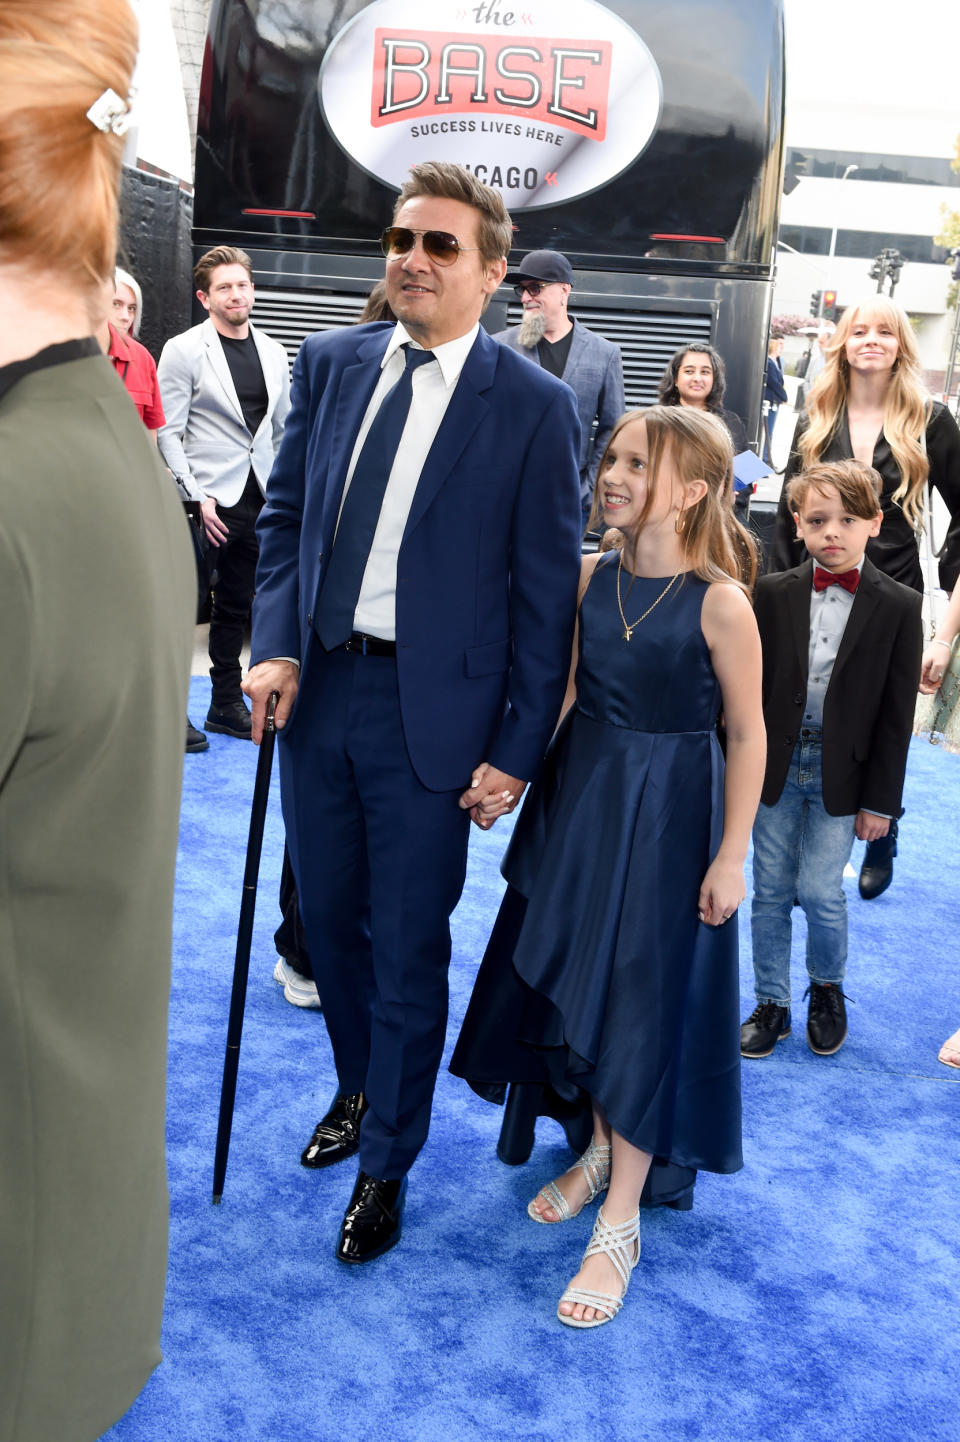 The actor and his daughter, Ava Berlin Renner, at the premiere of 